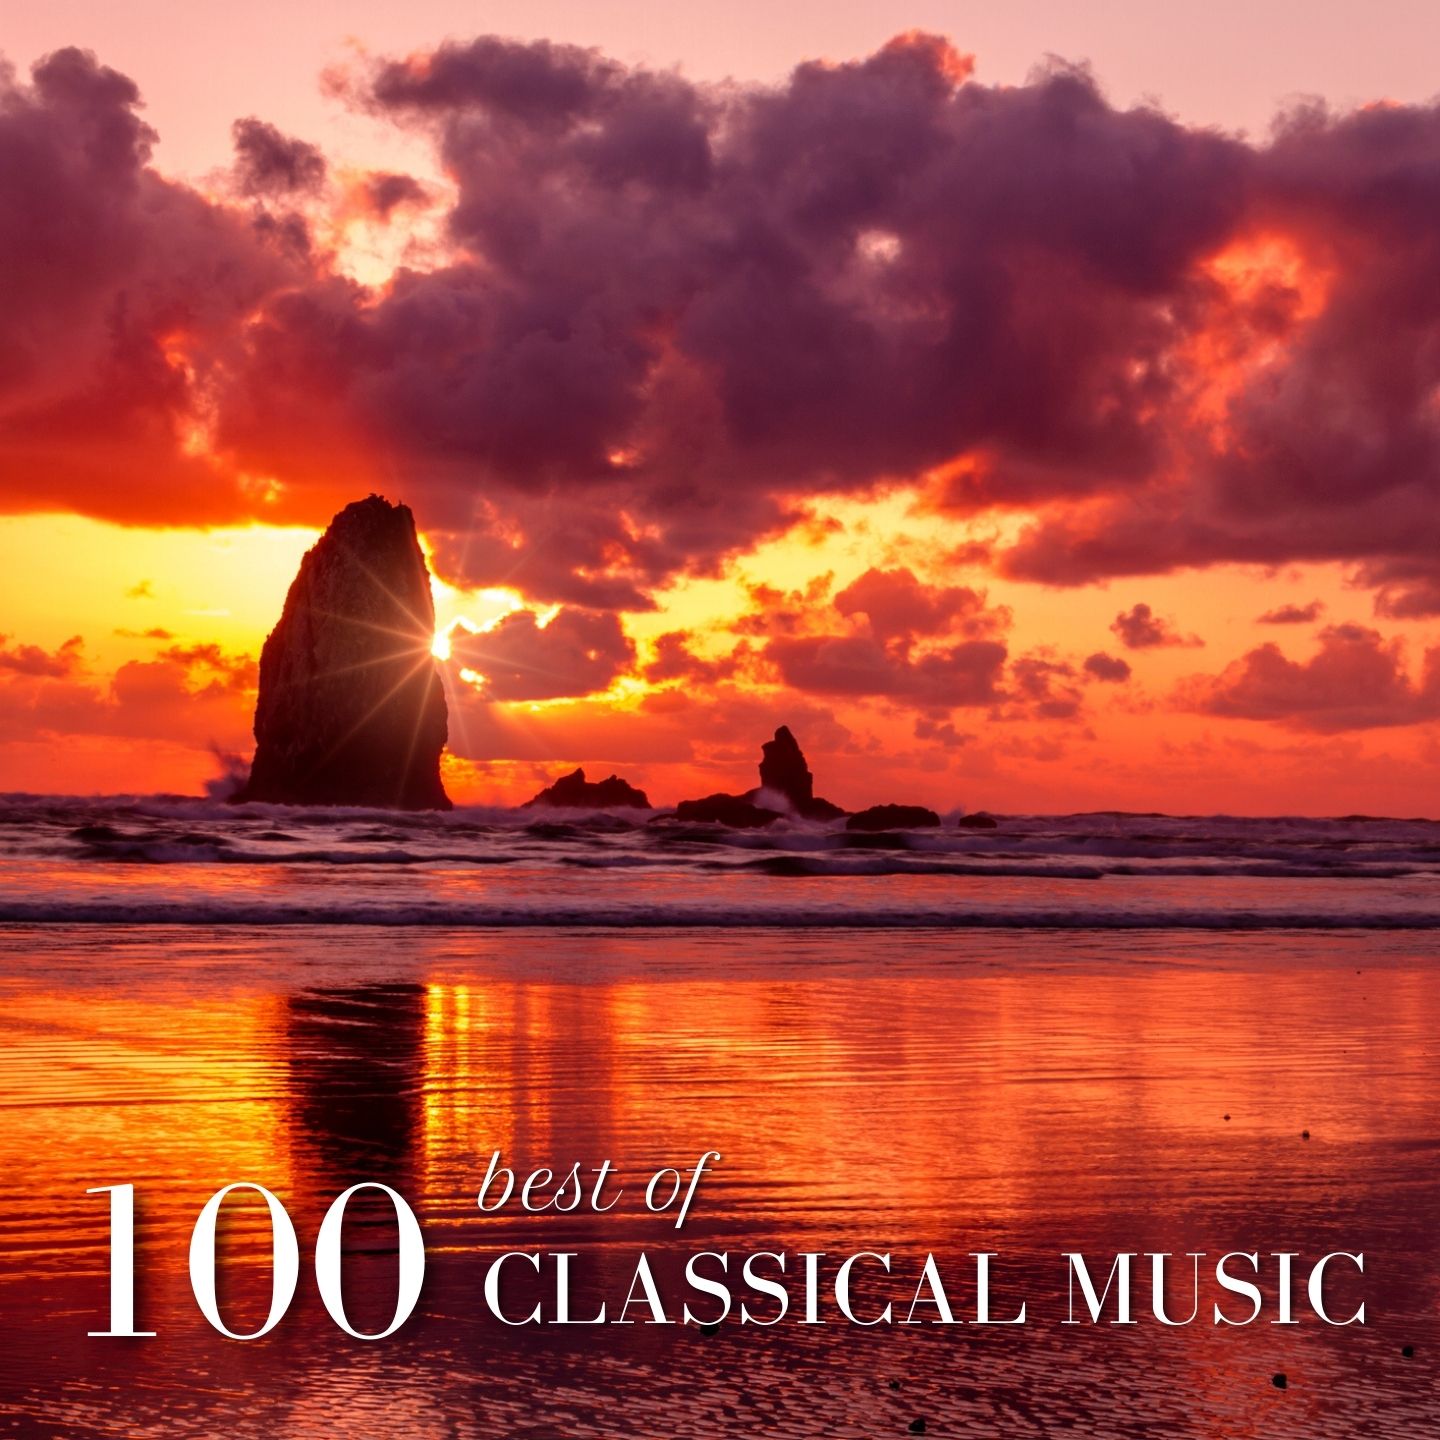 100 Best of Classical Music